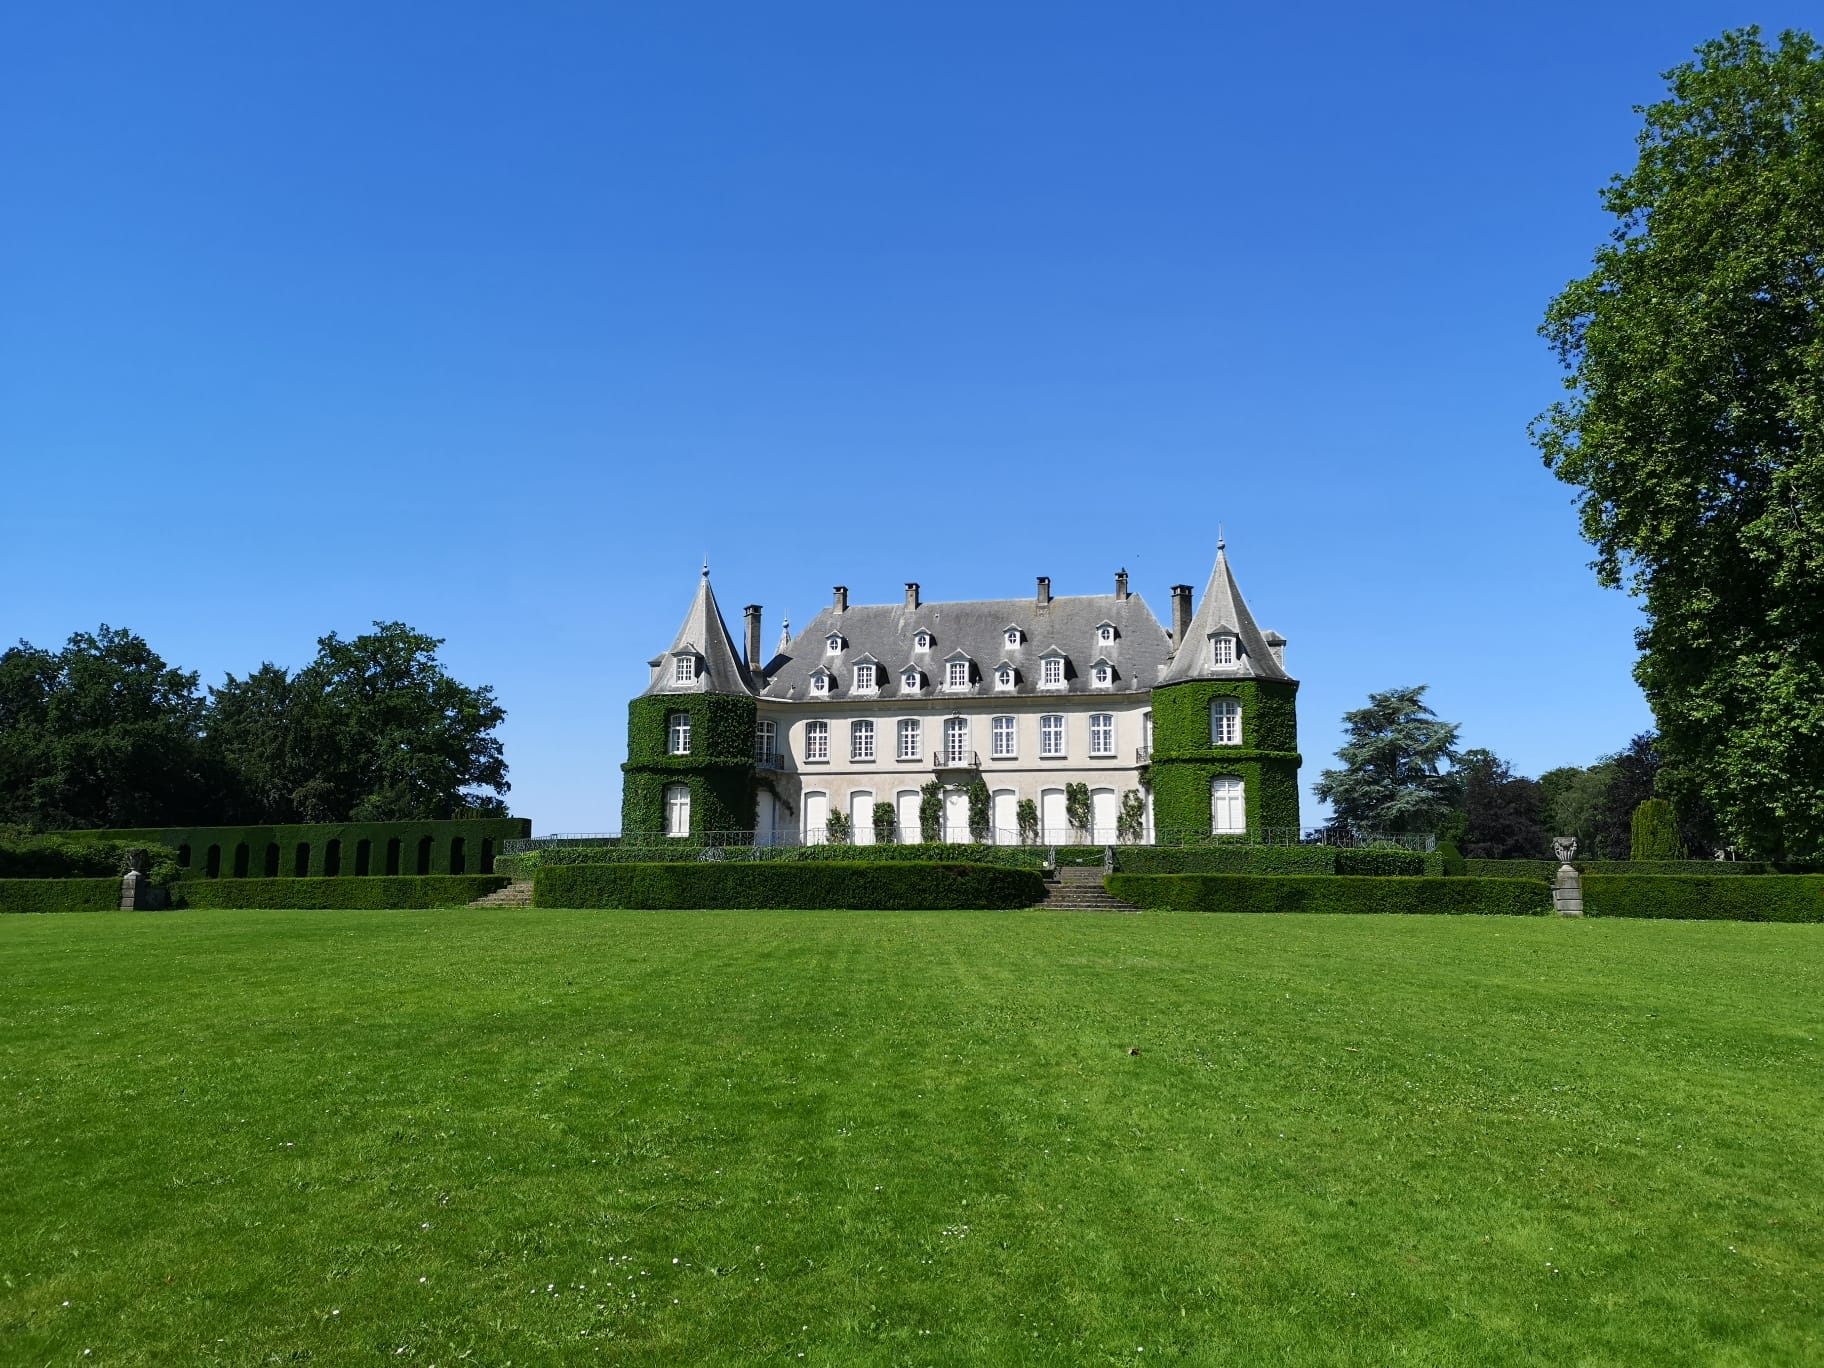 Chateau de La Hulpe with a large green grass space in front and a blue sky behind.